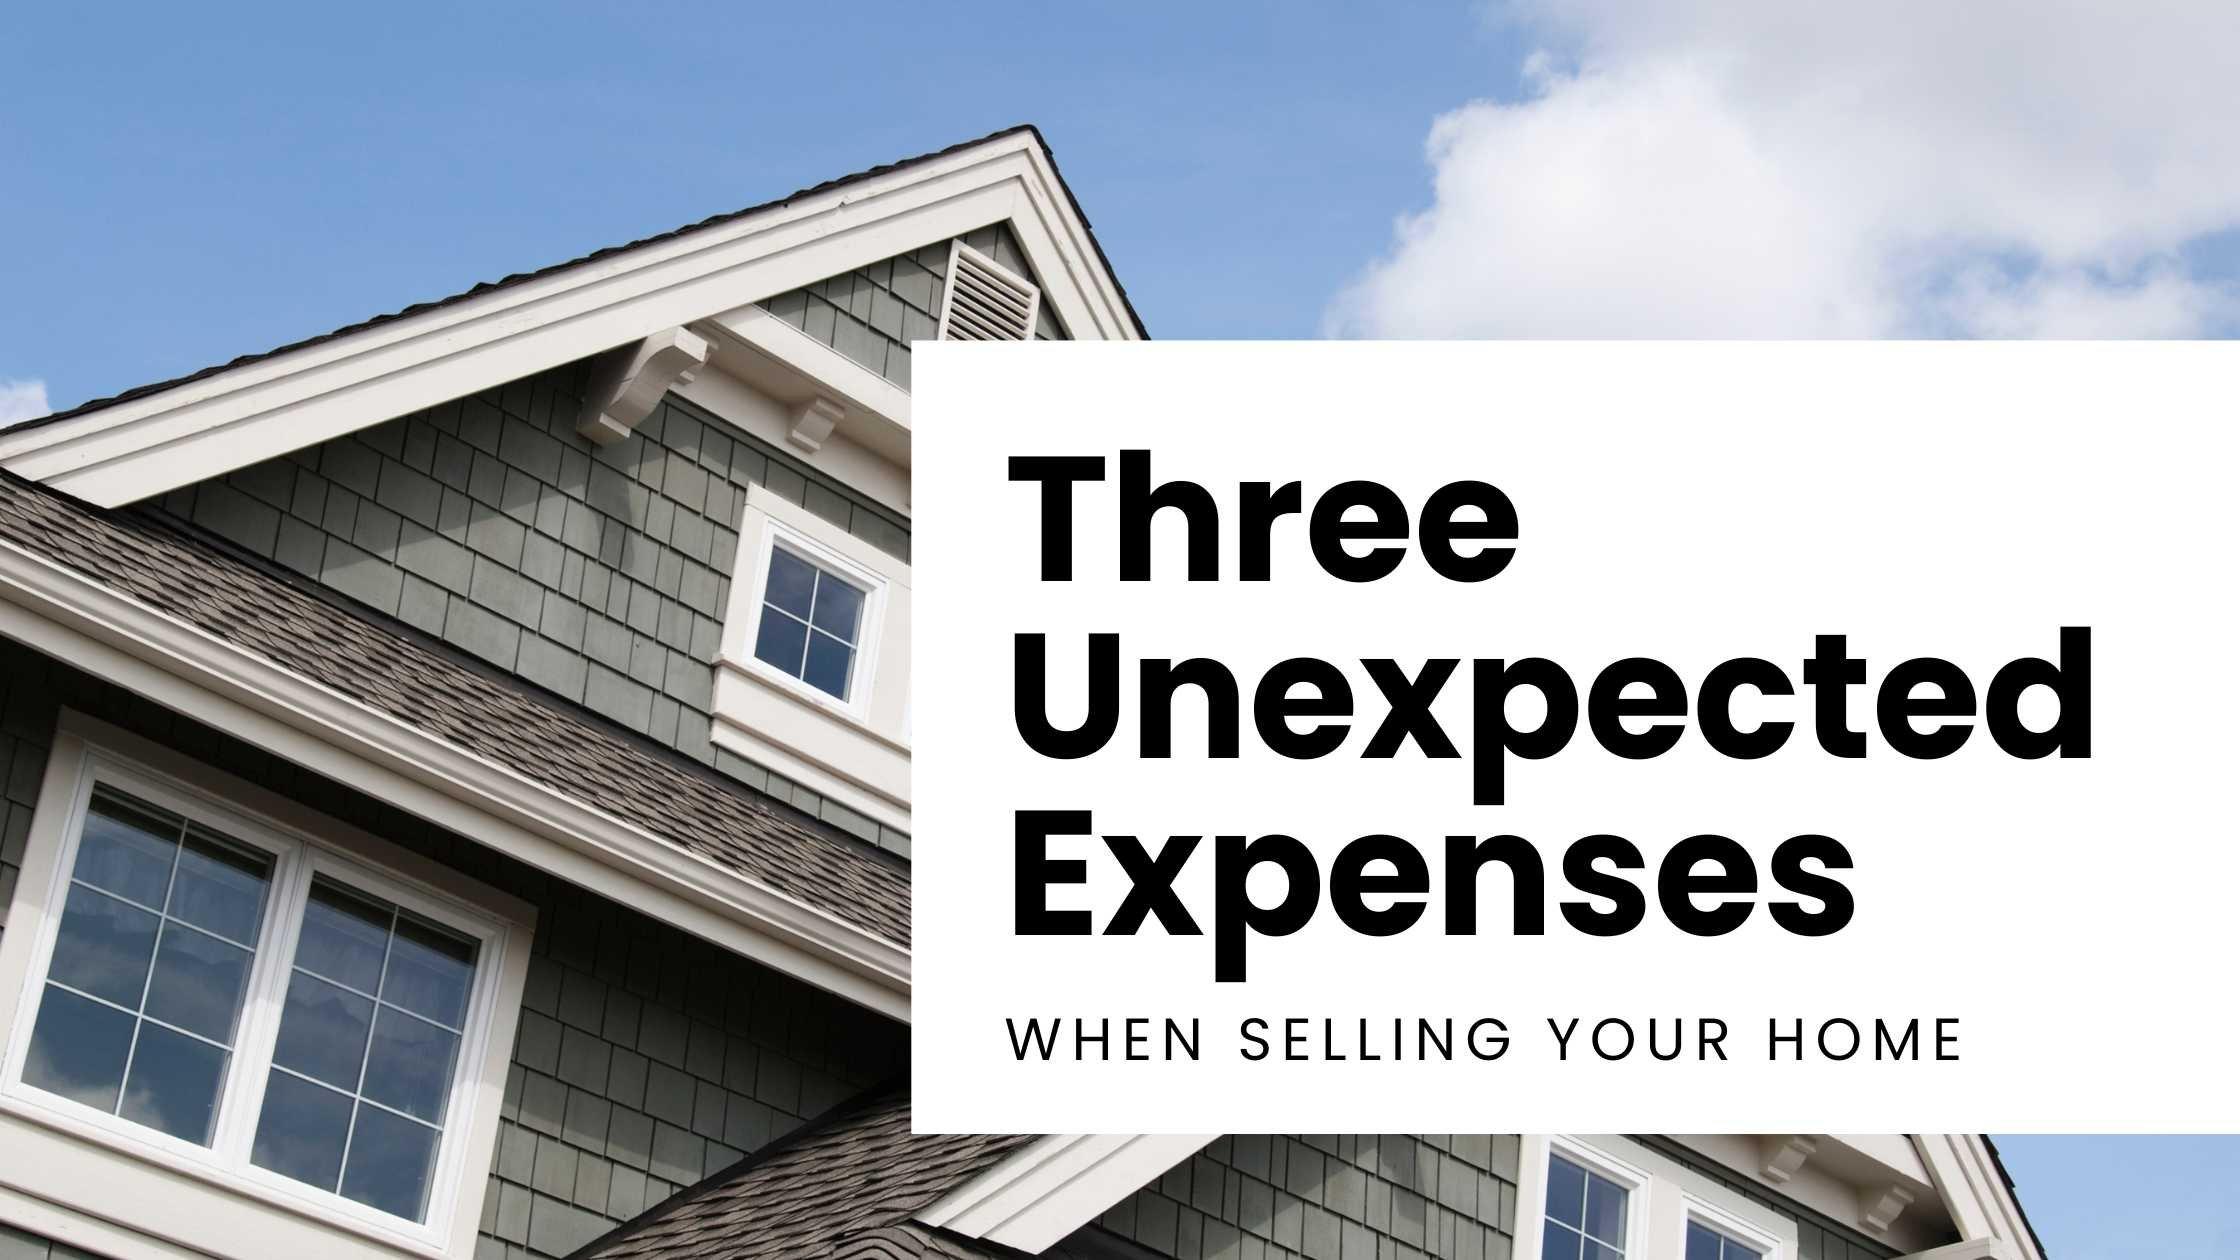 The Three Unexpected Expenses You’ll Face When Selling Your Home in Maryland